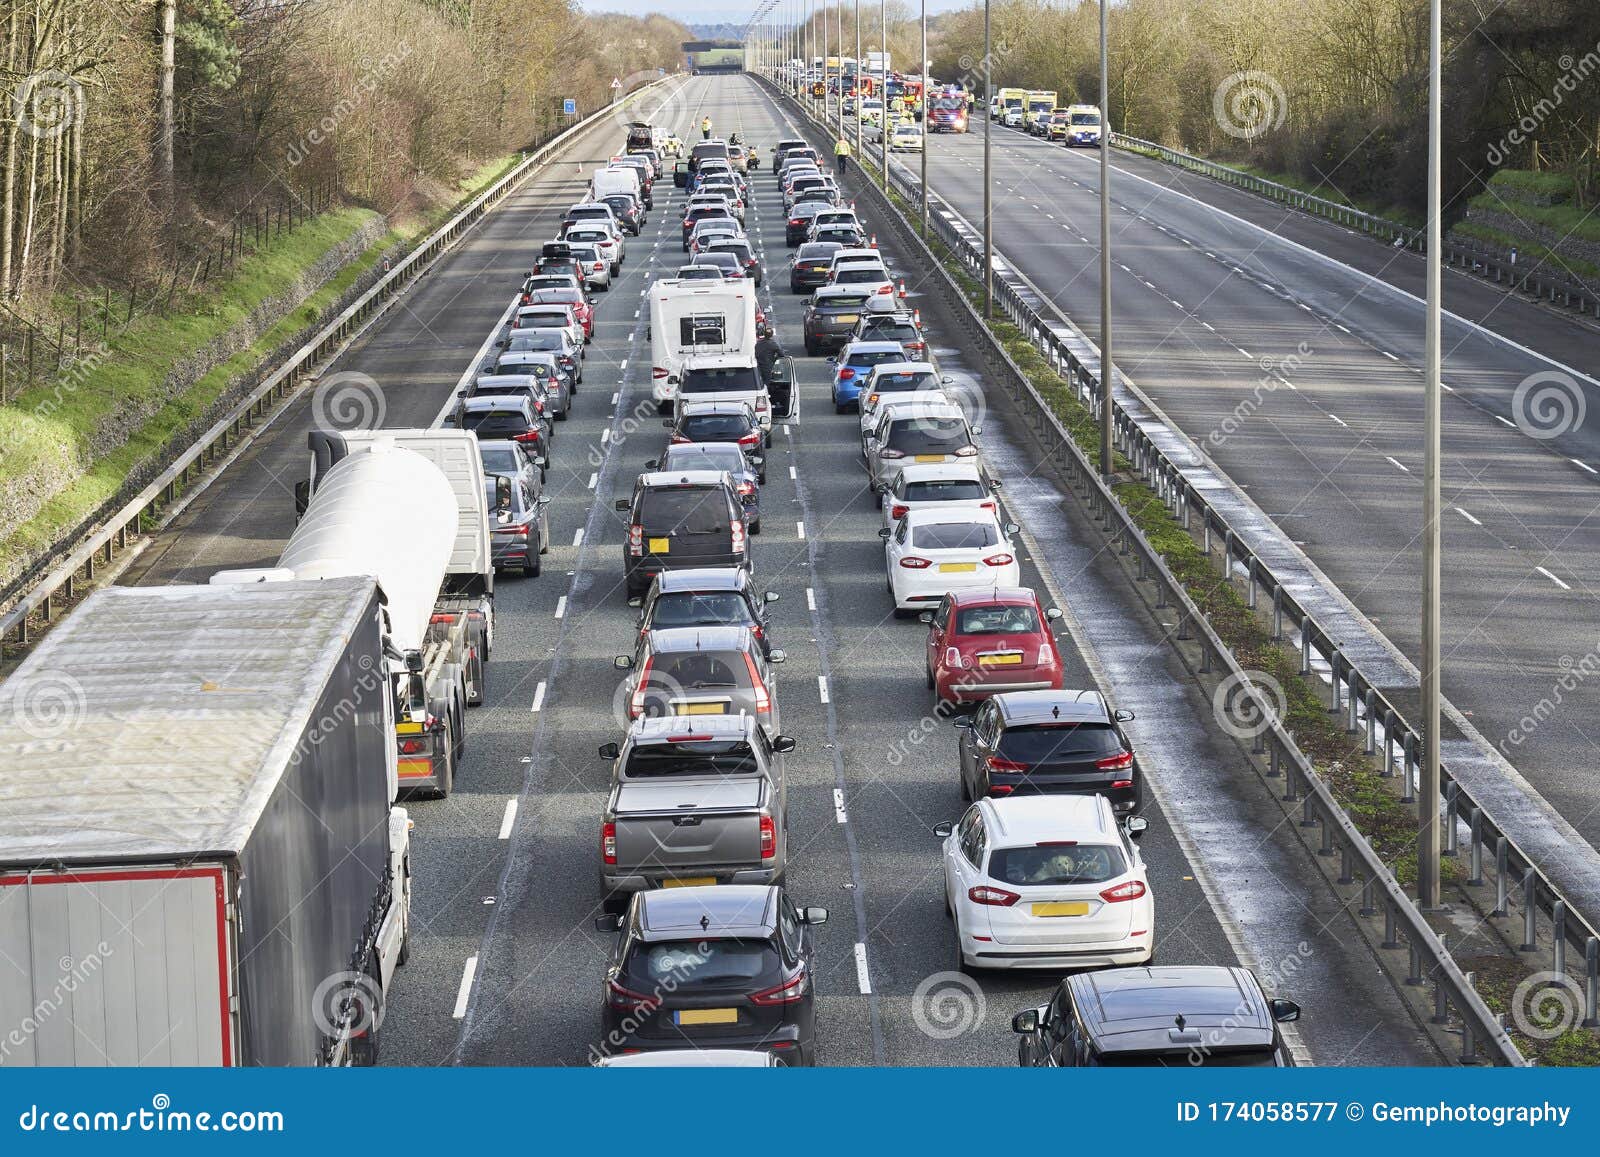 emergency services closing motorway to attend accident causing a traffic jam